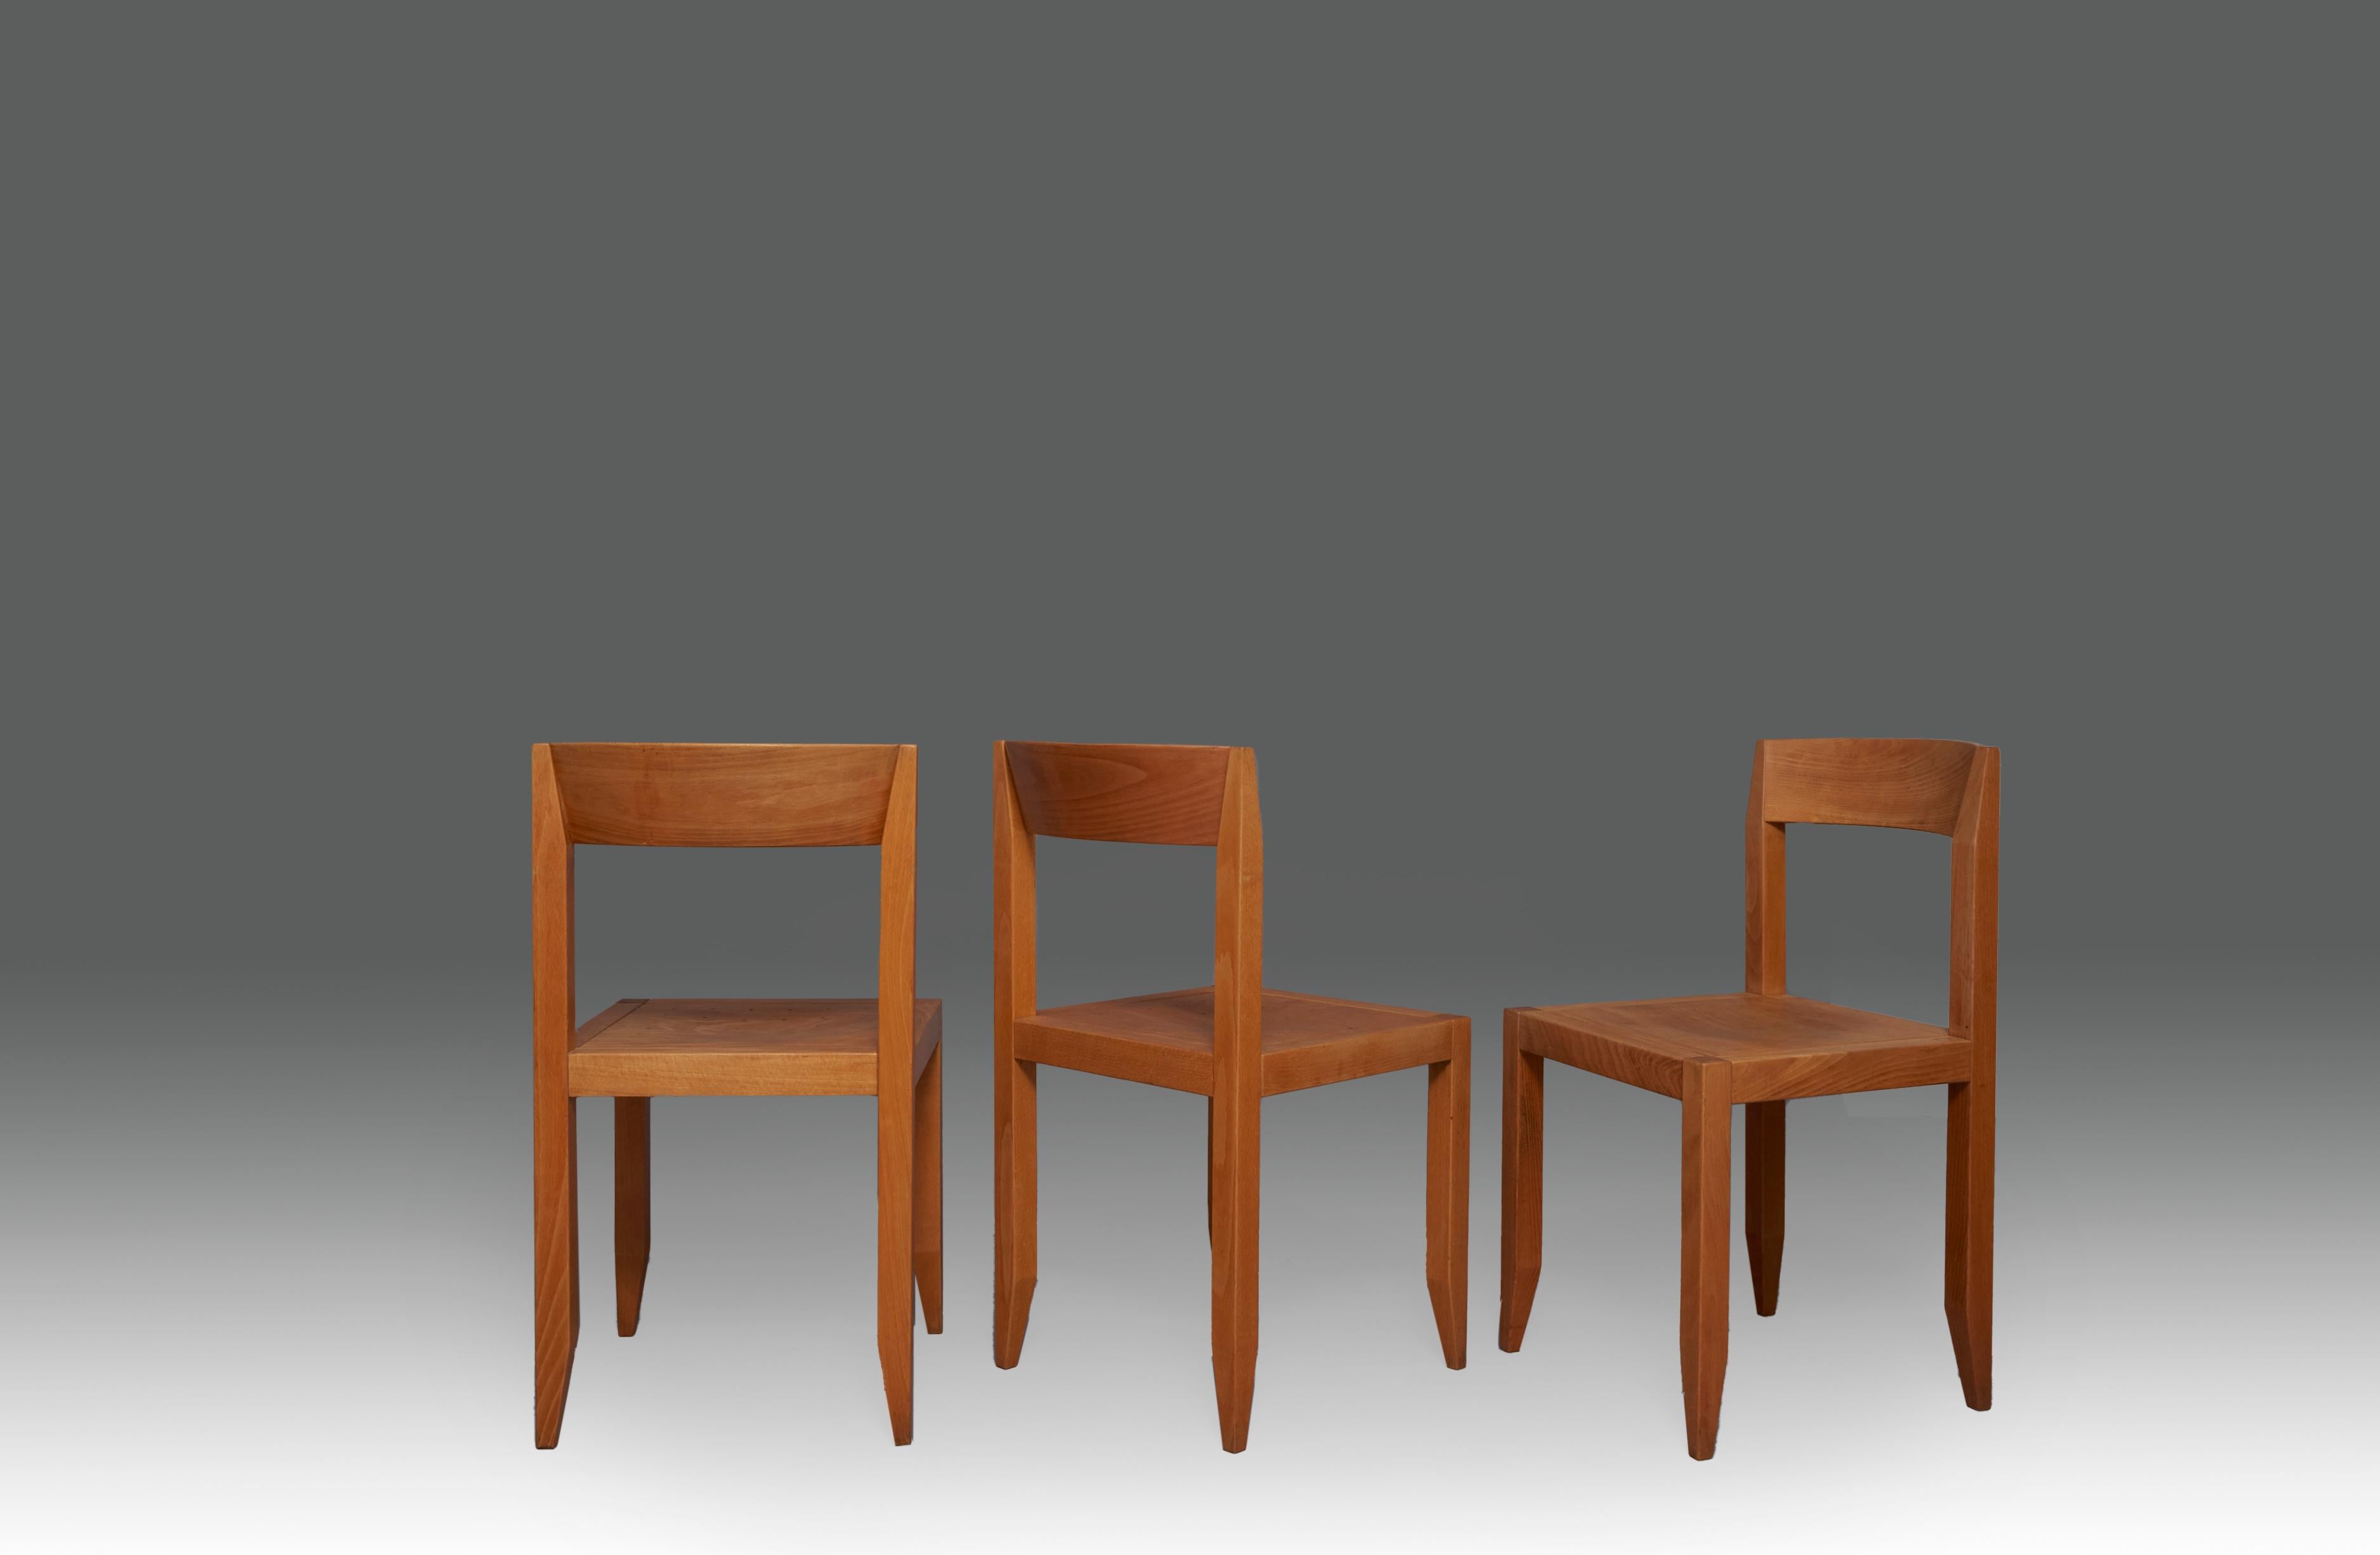 Five dining chairs in hardwood by unknown designer. Switzerland, 1980s.
Very good refinished condition, with use signs related to age.
  